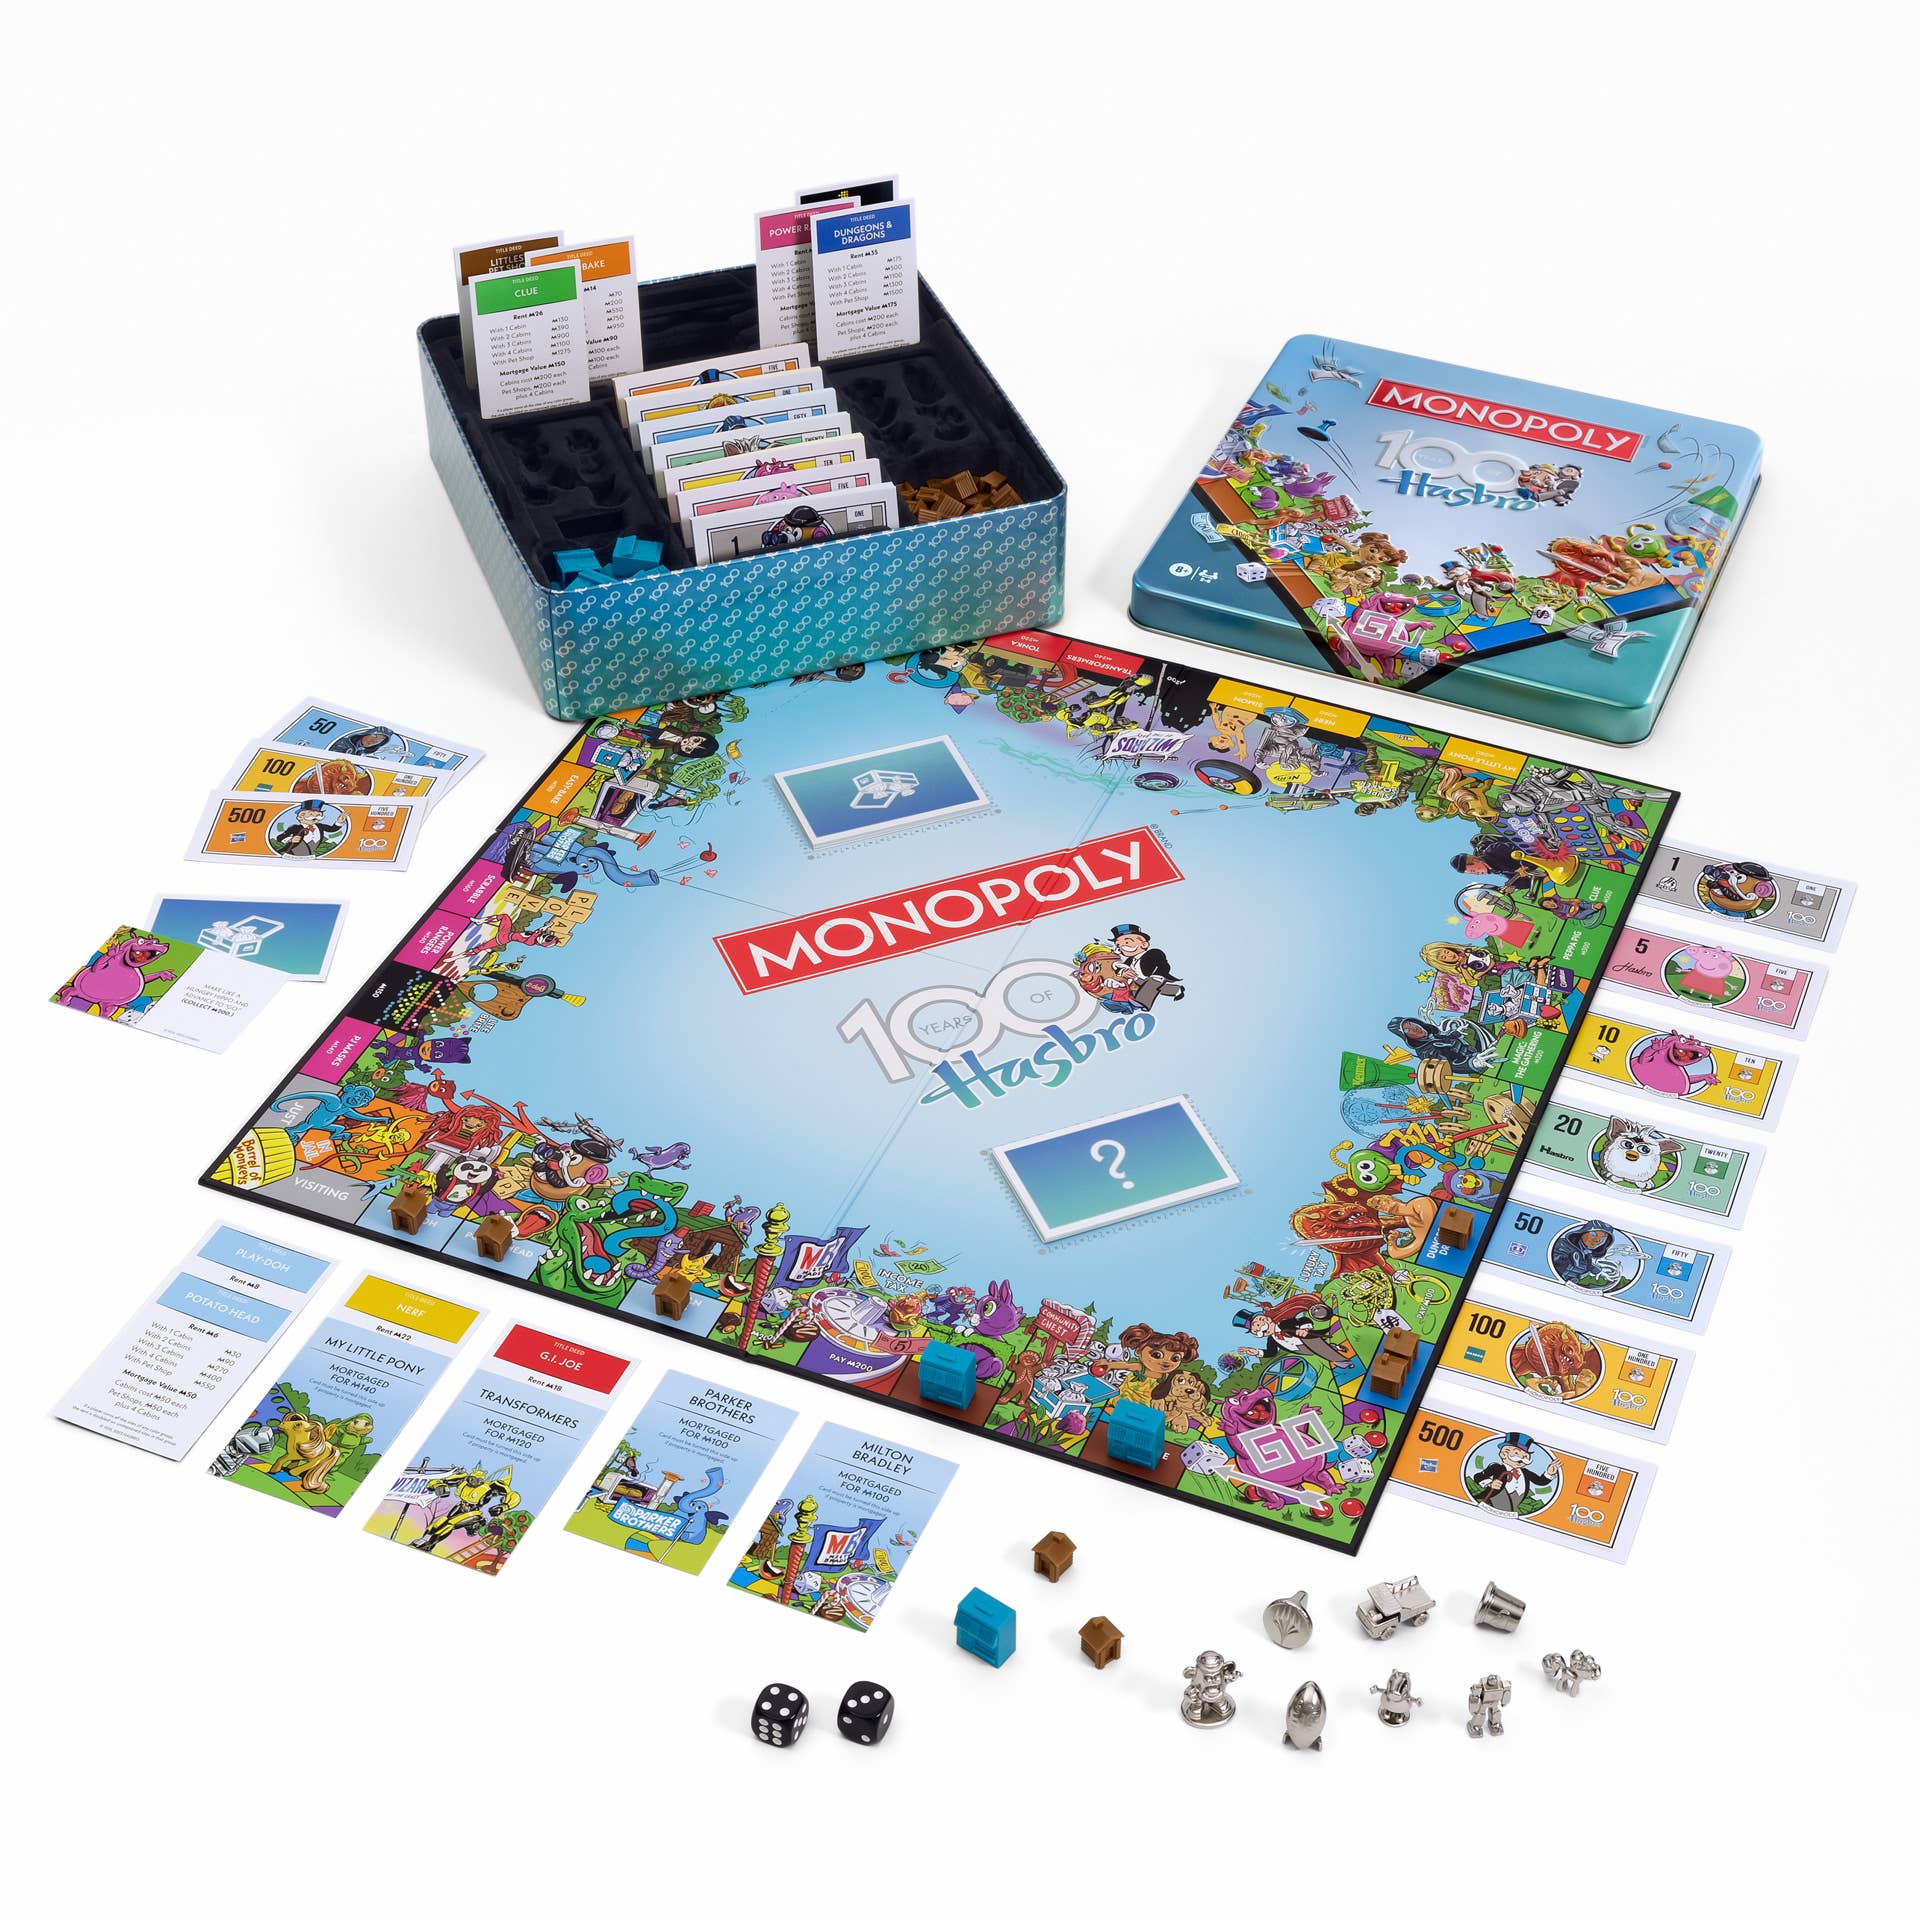 MONOPOLY CLASSIC by HASBRO, INC.